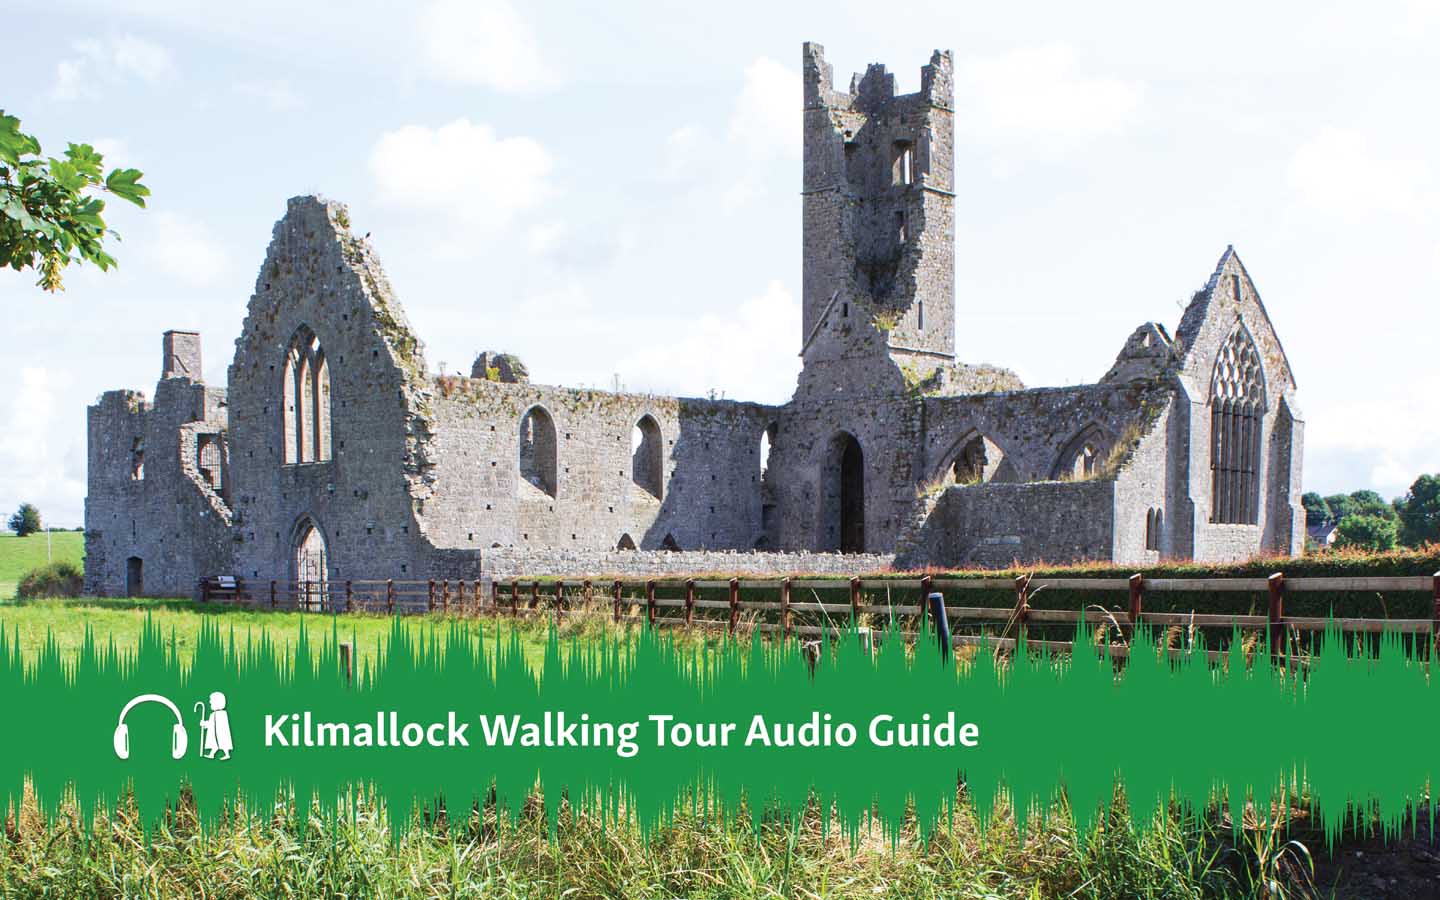 Audioguide Kilmallock featured image showing Abbey